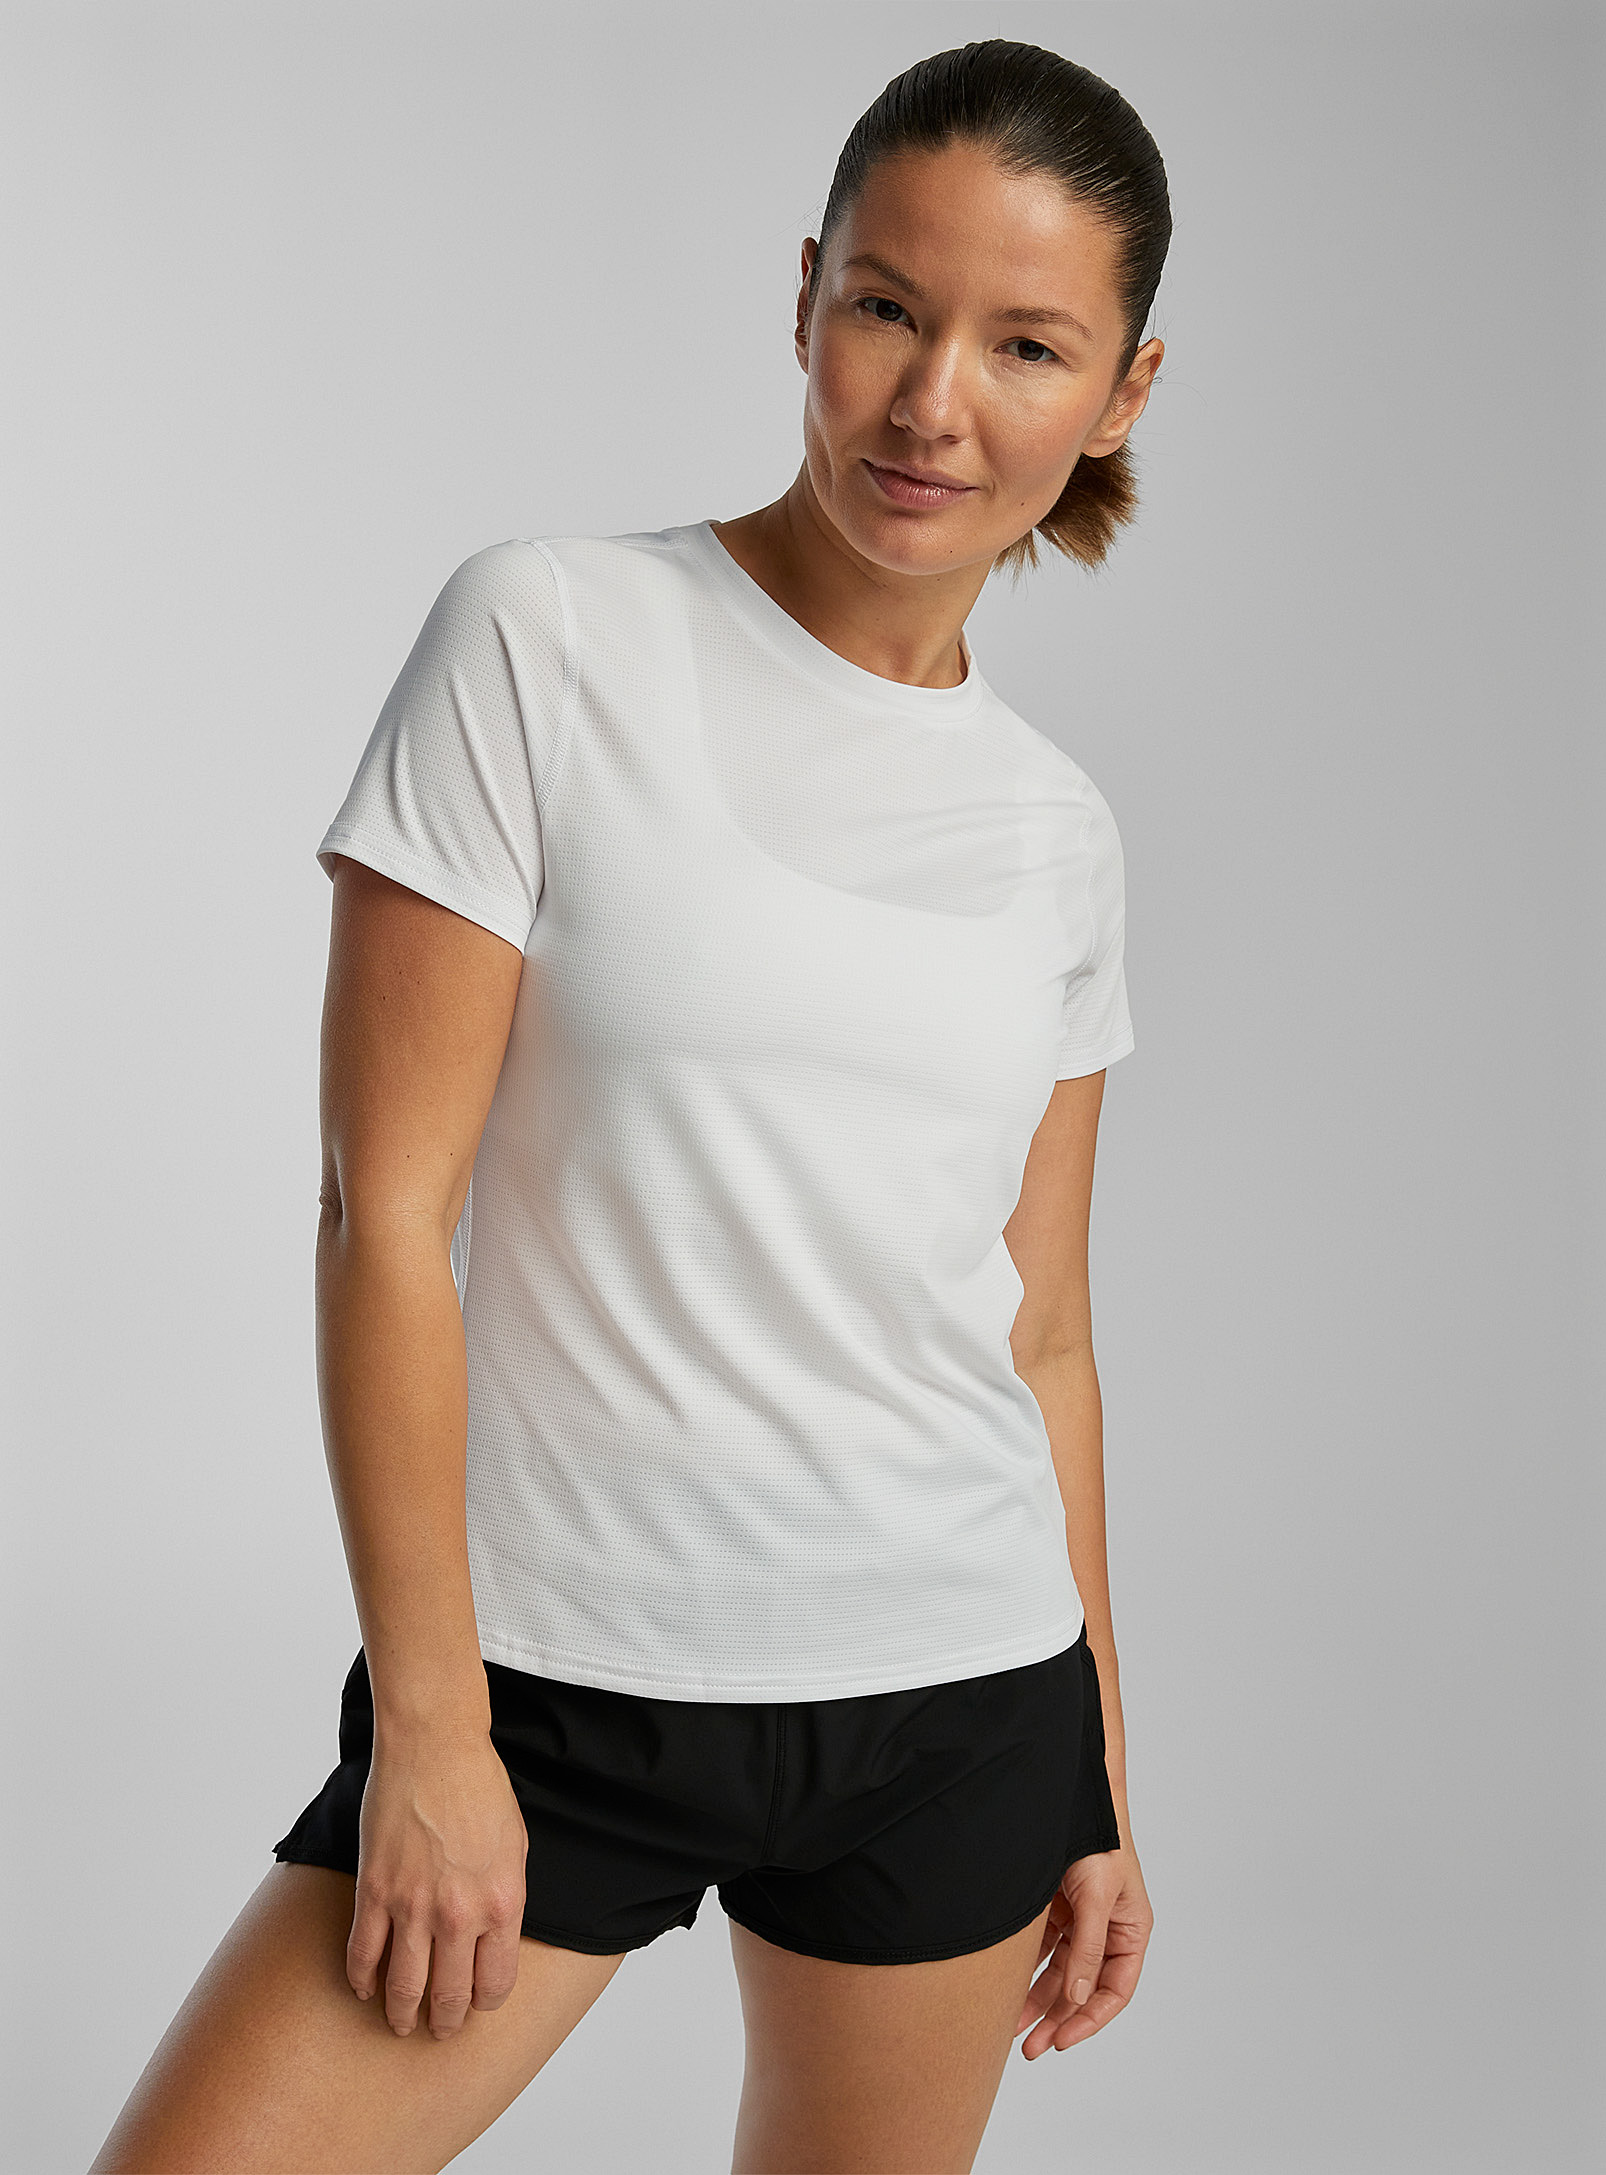 I.fiv5 Micro-perforated Fitted Tee In White